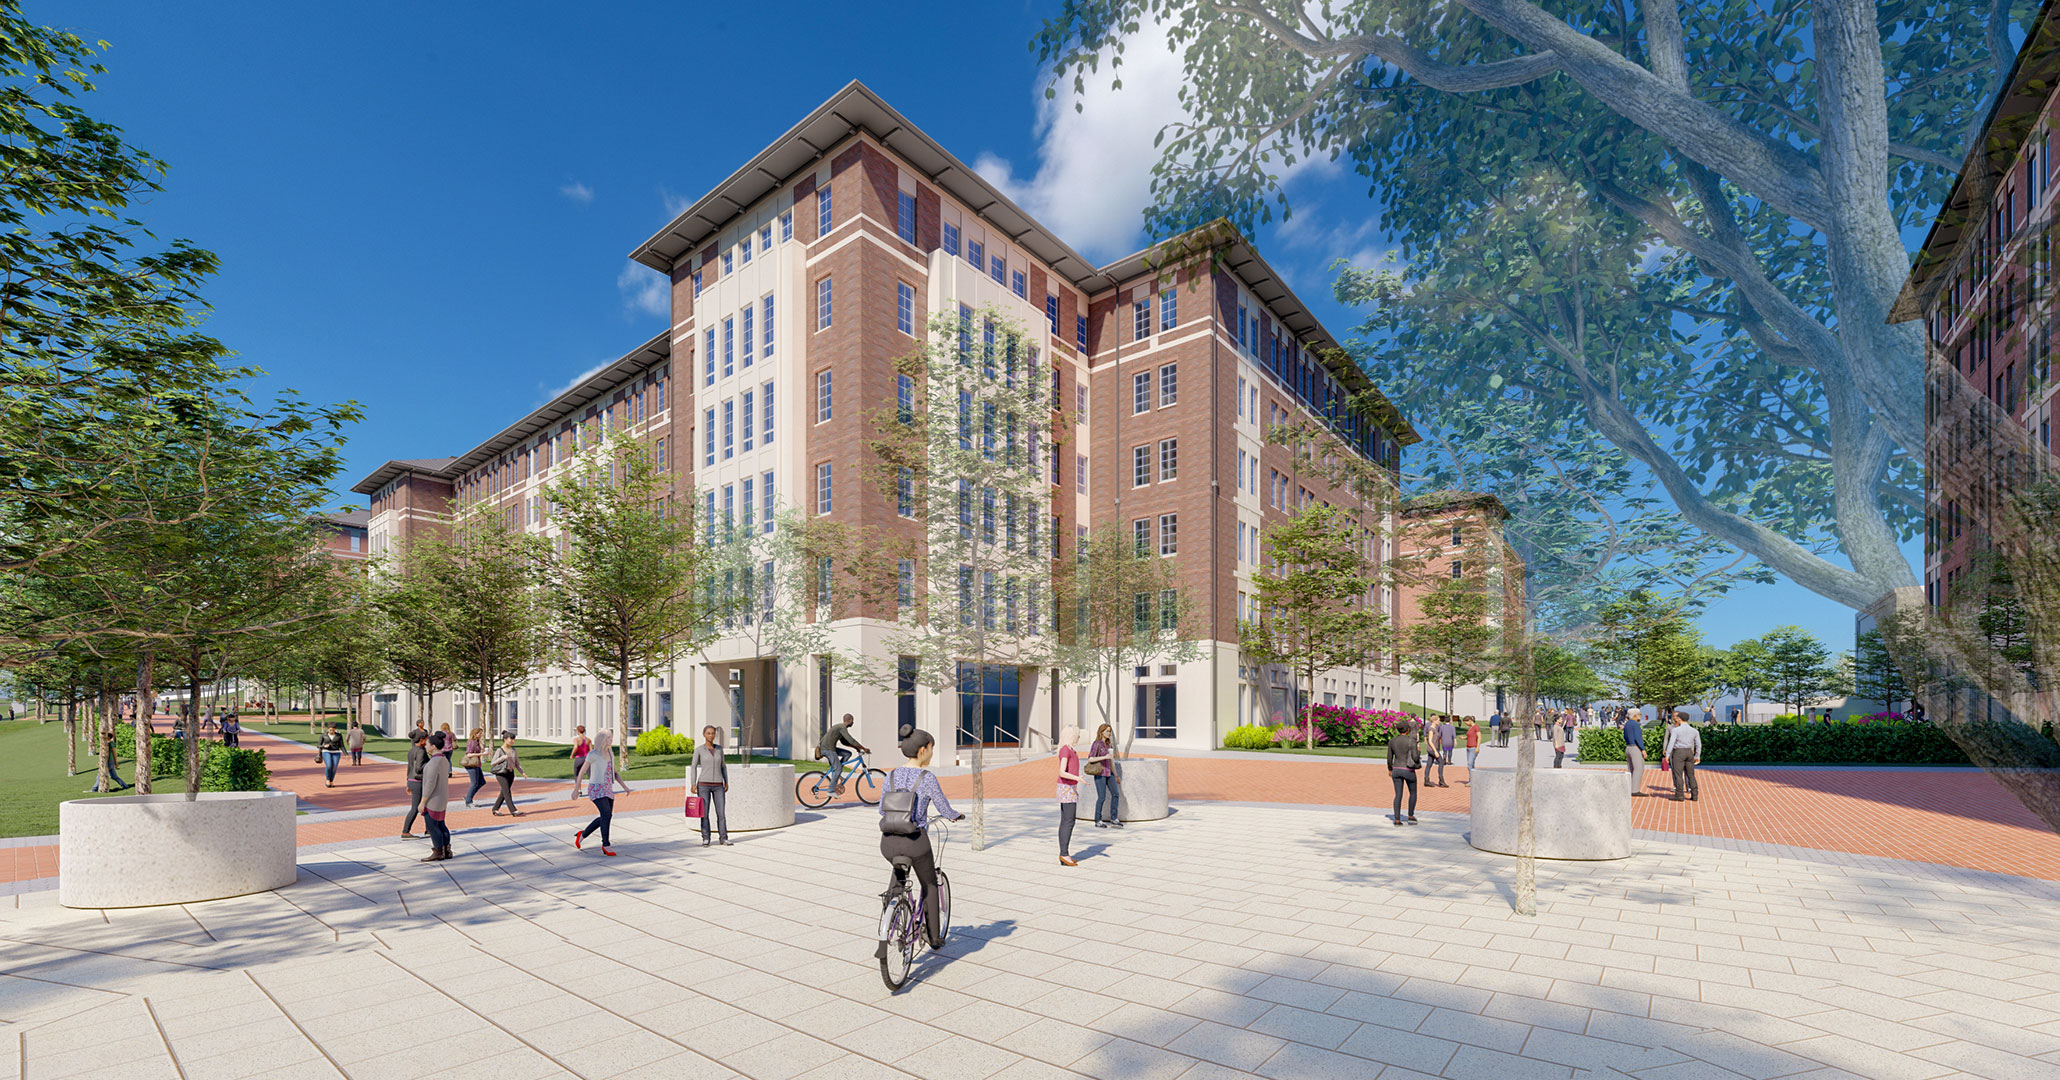 New development at University of South Carolina Campus Village designed by Boudreaux architects in Columbia, SC.